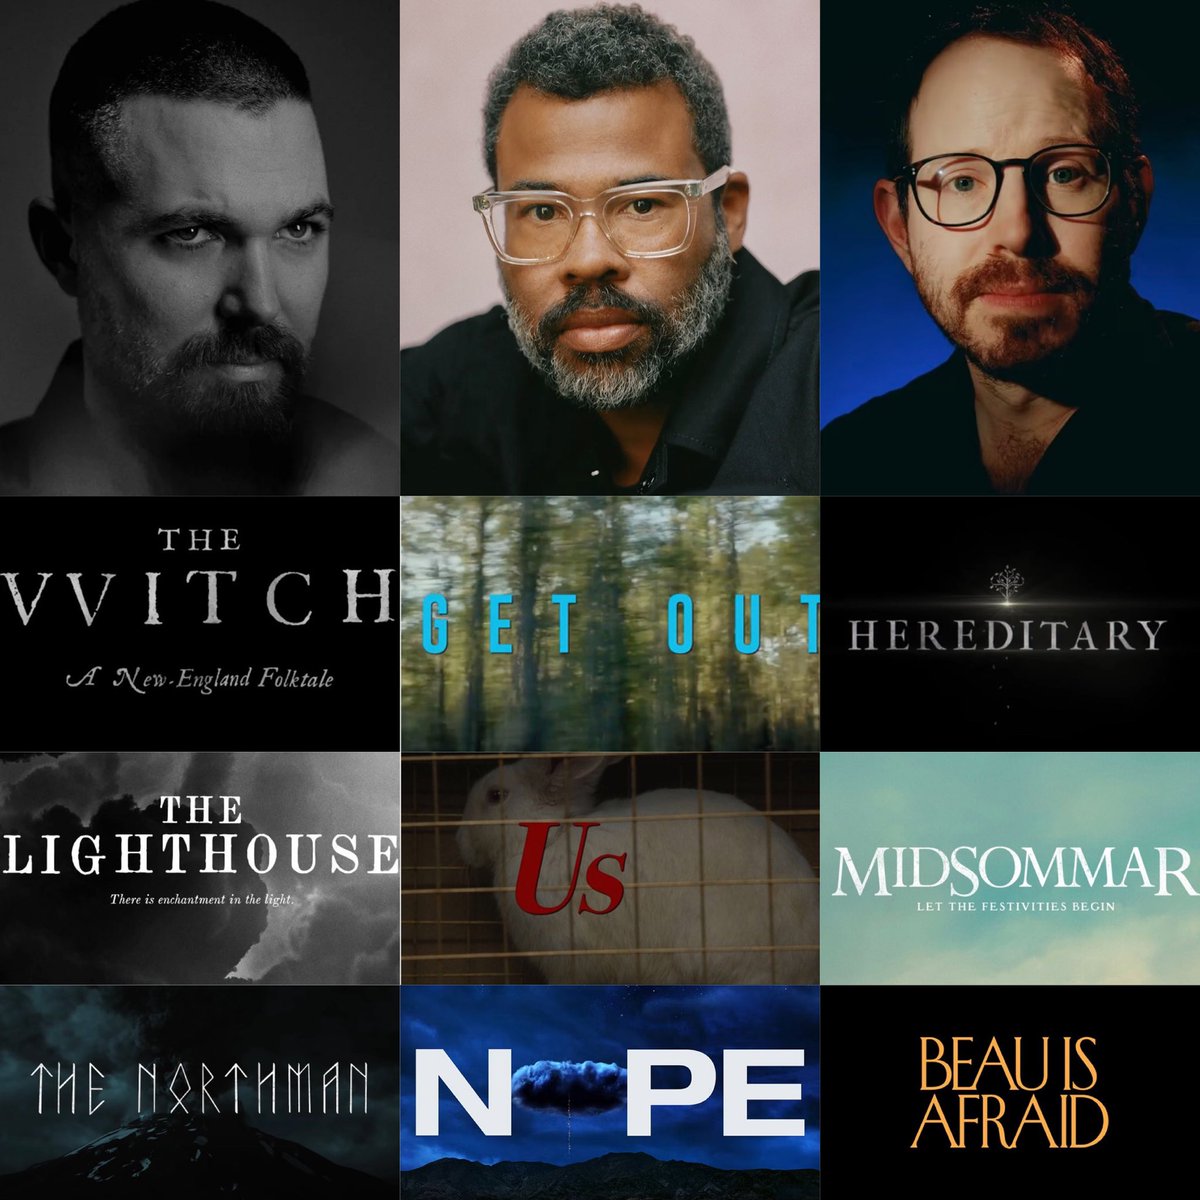 Which director has your favorite lineup so far? 

• Robert Eggers: The Witch, The Lighthouse, The Northman

• Jordan Peele: Get Out, Us, Nope

• Ari Aster: Hereditary, Midsommar, Beau is Afraid